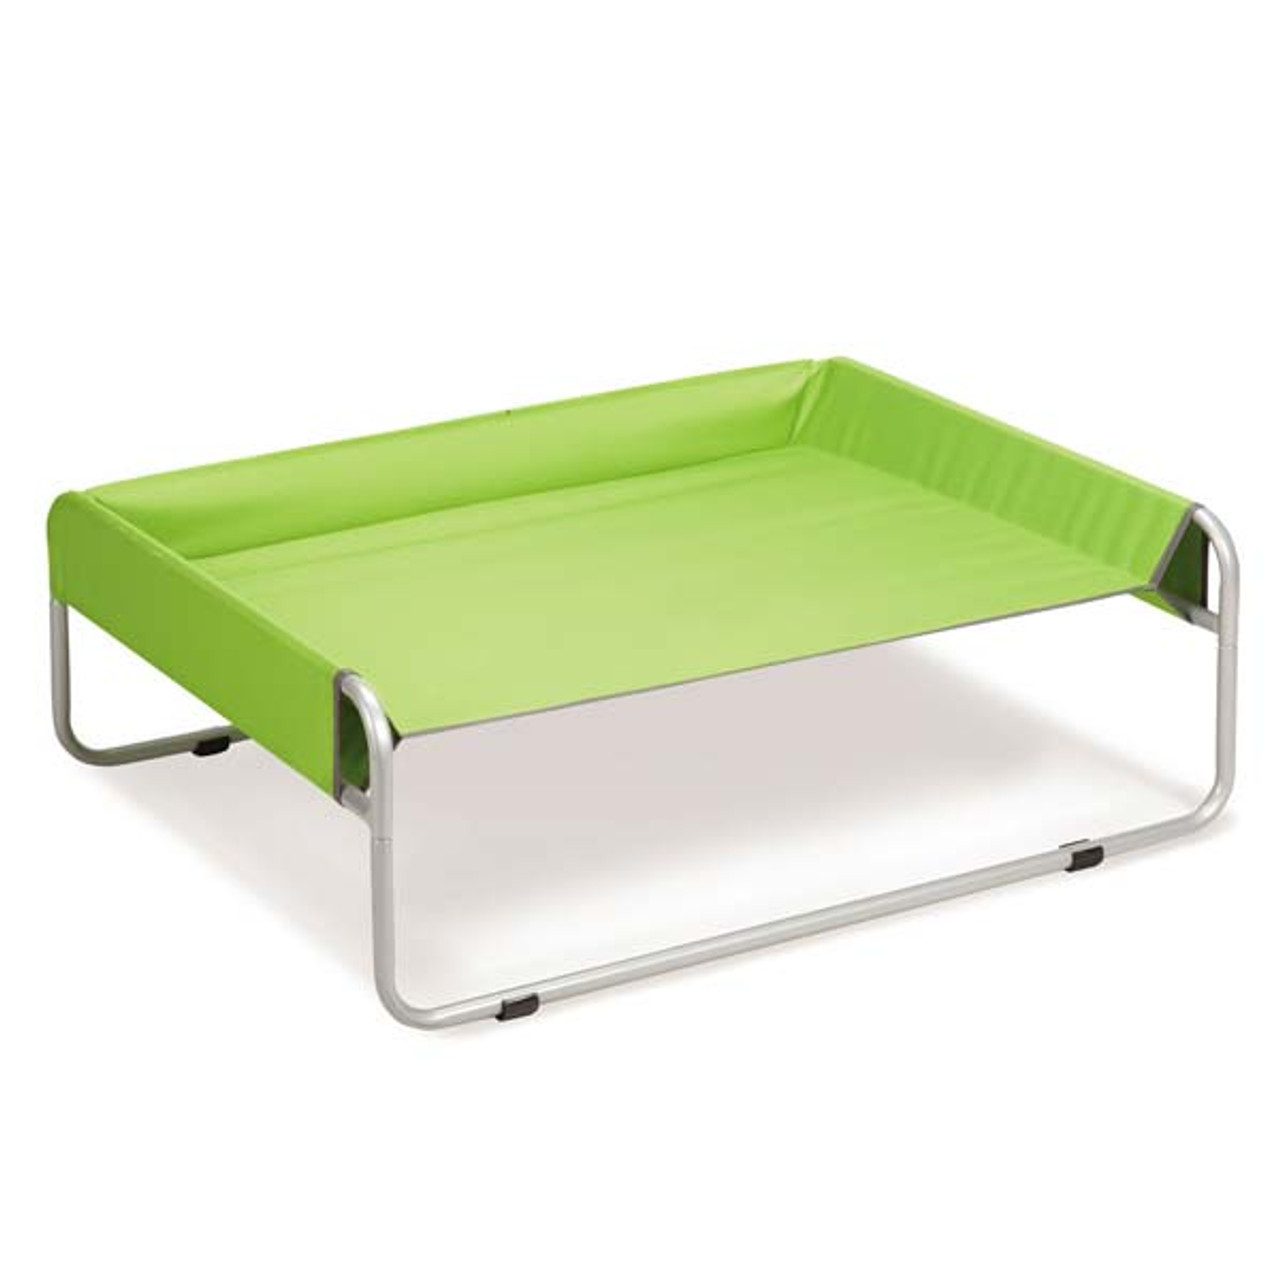 Insect Shield Pet Cot Lounger